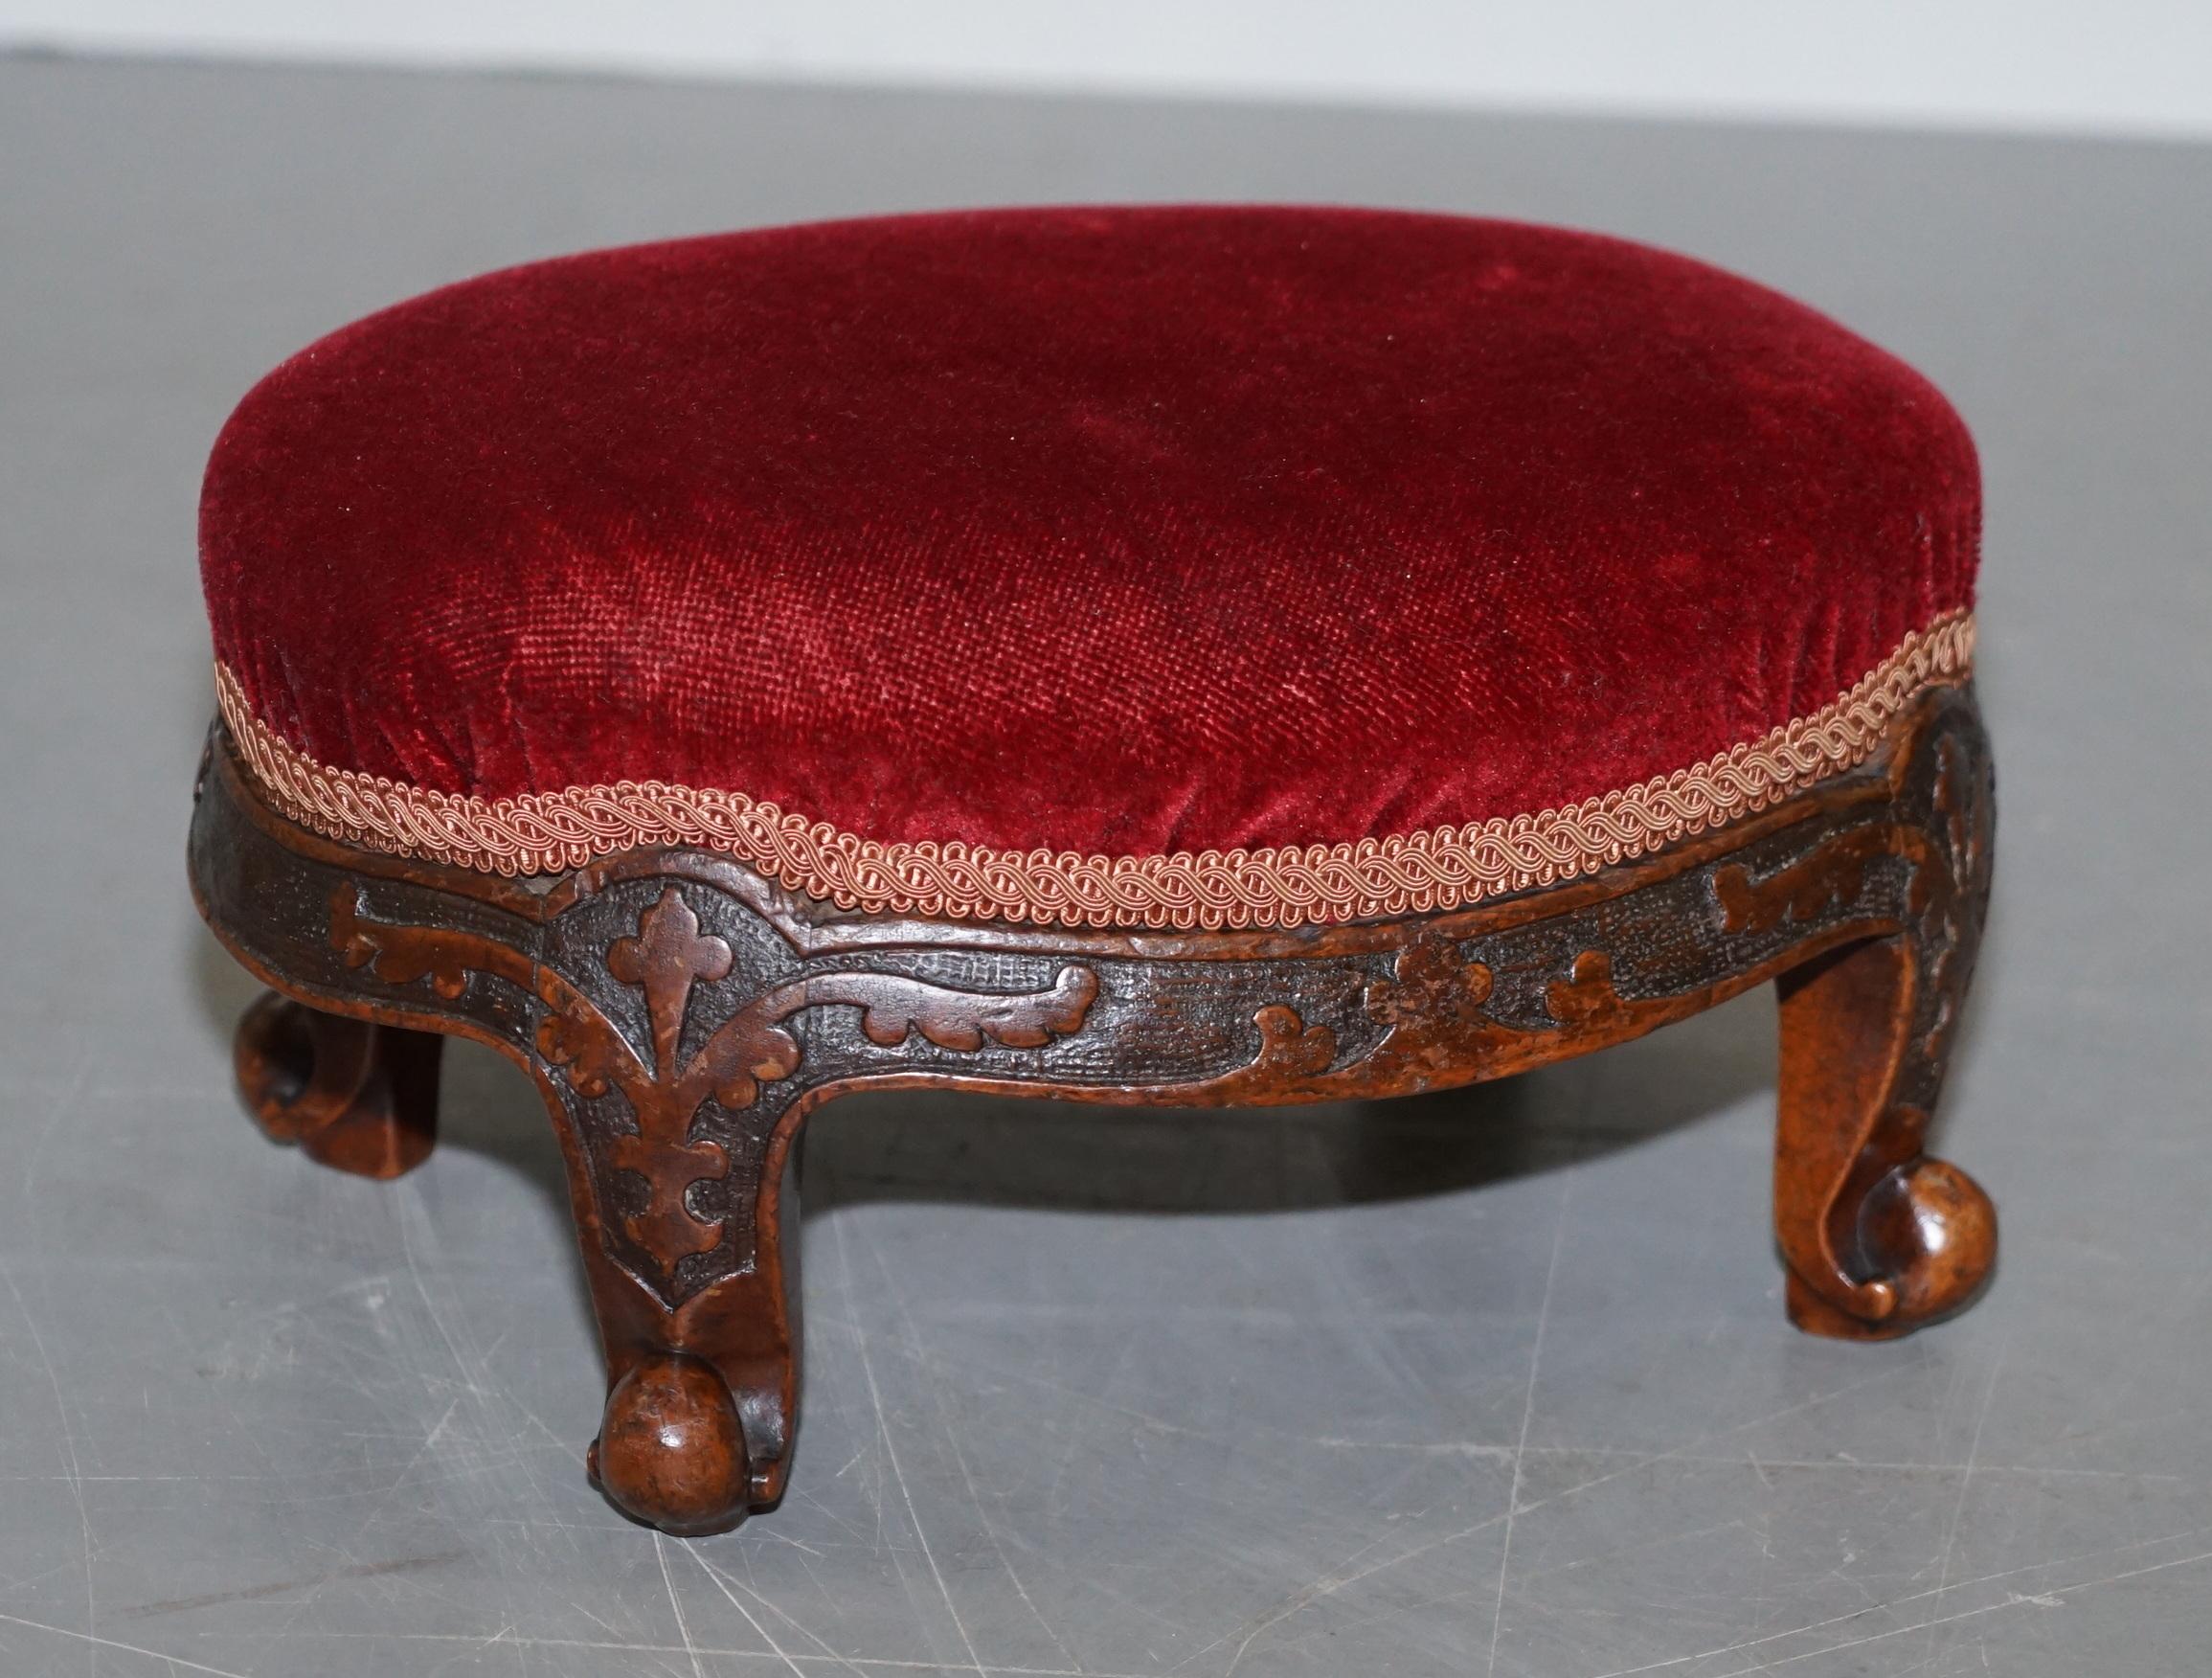 We are delighted to offer for sale this very fine pair of original George II circa 1760 English mahogany footstools

These are absolutely exquisite, made in the Chippendale era and clearly after his style of carving. The detail is never